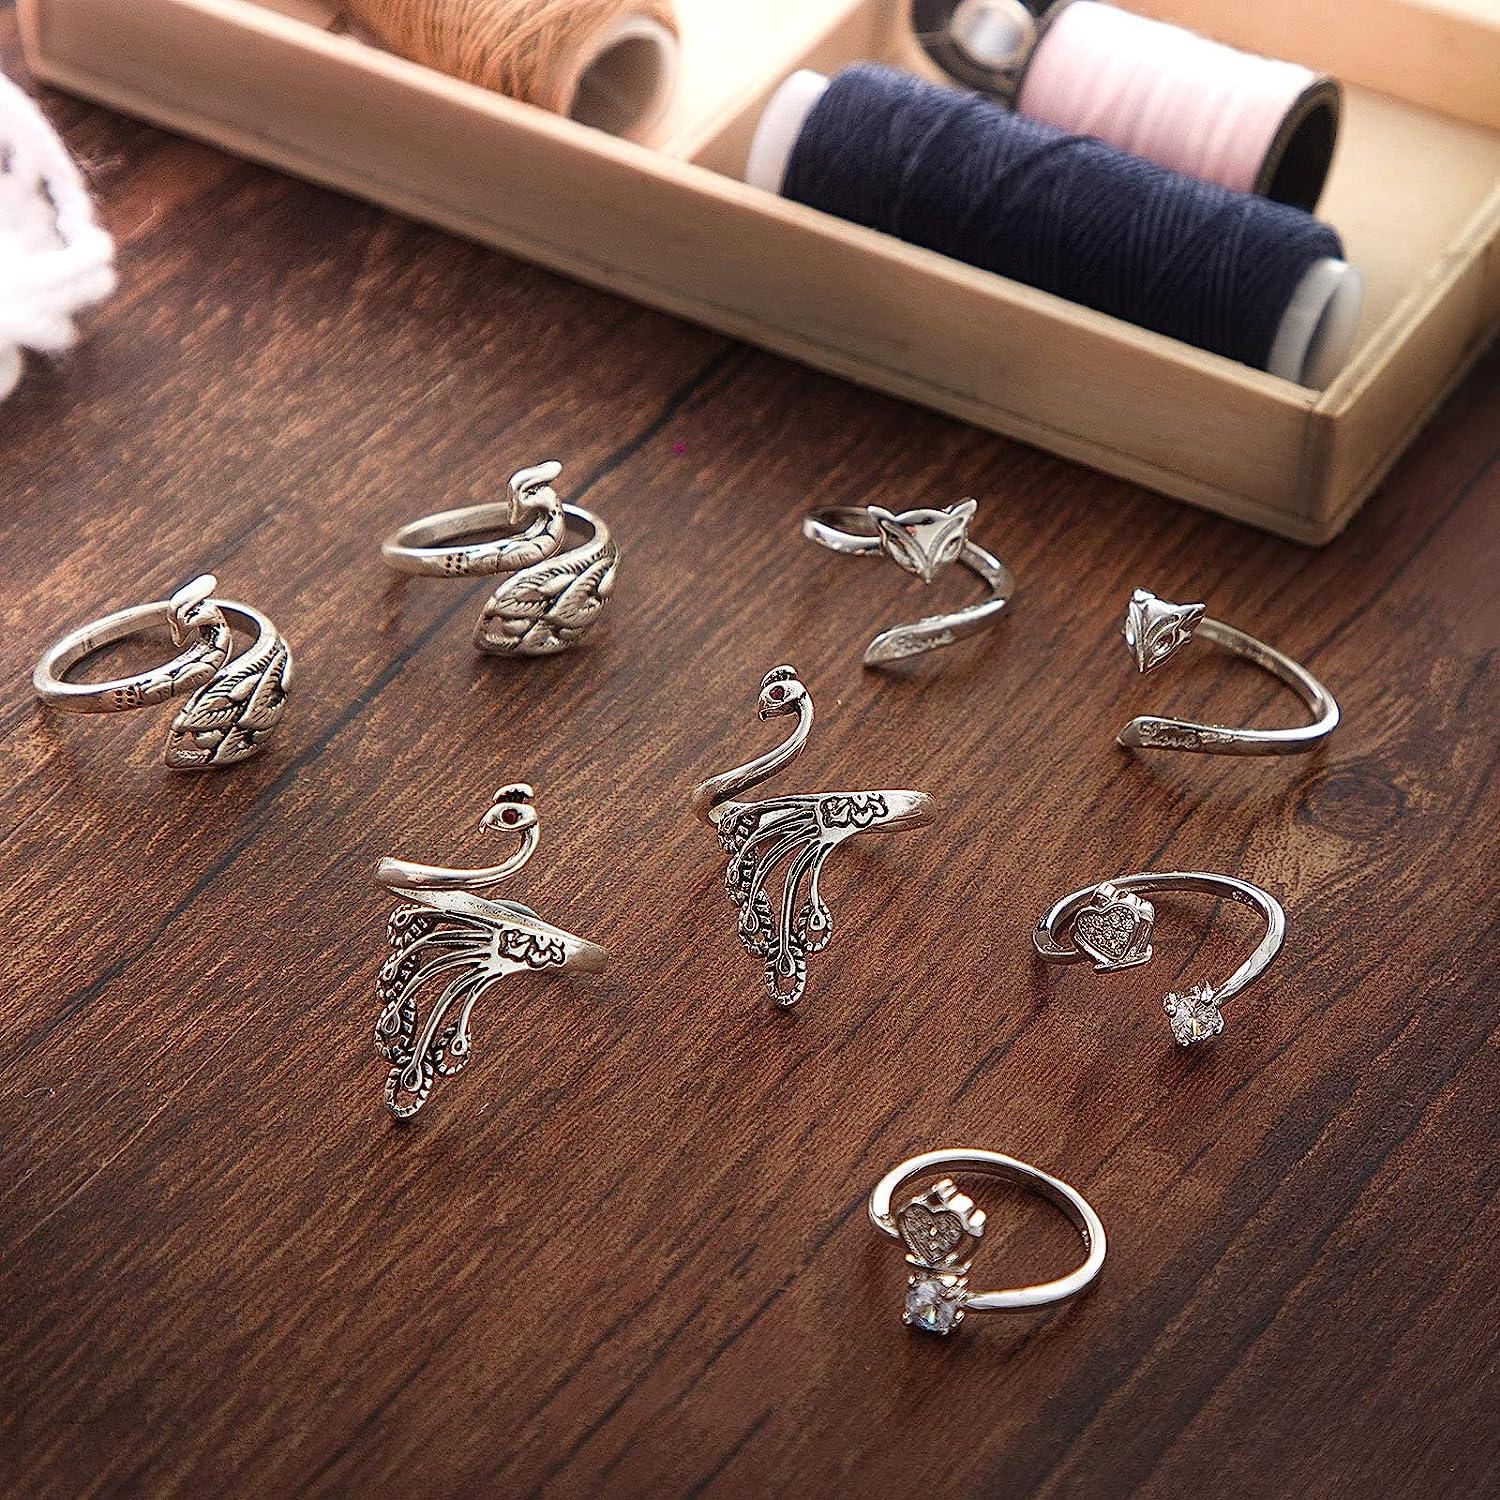 6 Pieces Knitting Loop Crochet Ring Adjustable Knitting Loop Ring Peacock  Open Finger Ring Thimble Metal Yarn Guide Finger Holder for Quilting Sewing